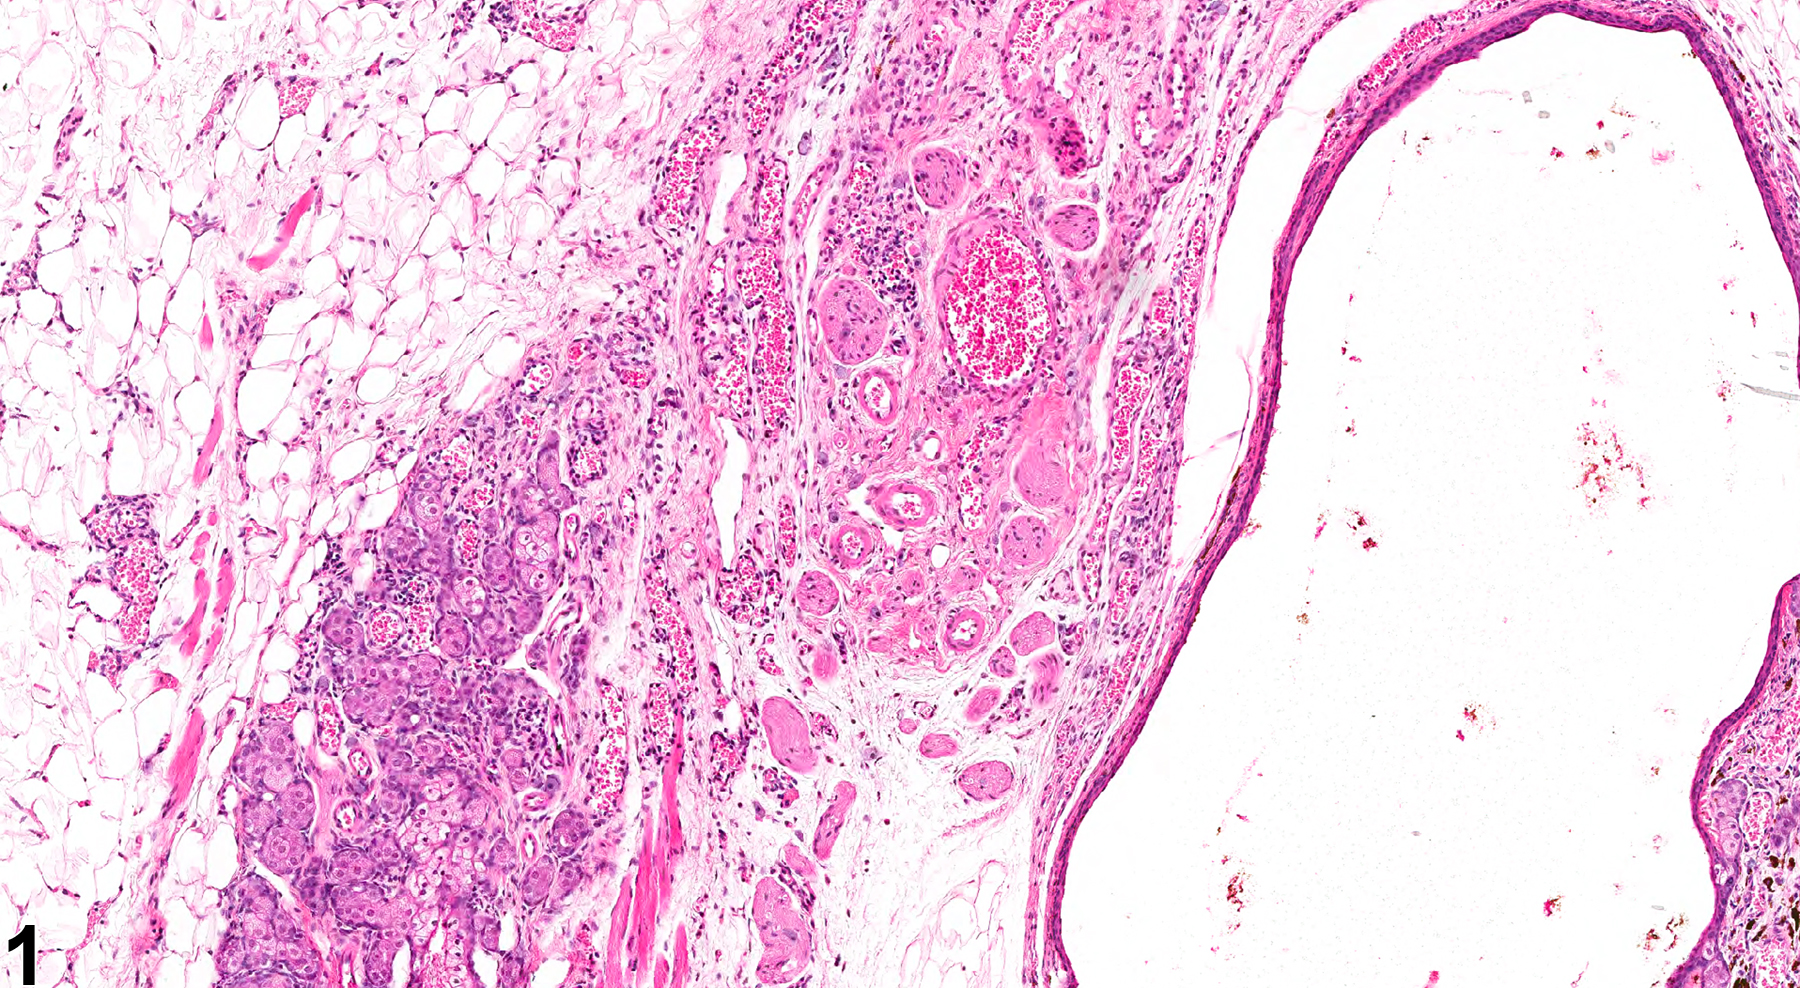 Image of angiectasis in the clitoral gland from a female B6C3F1 mouse in a chronic study